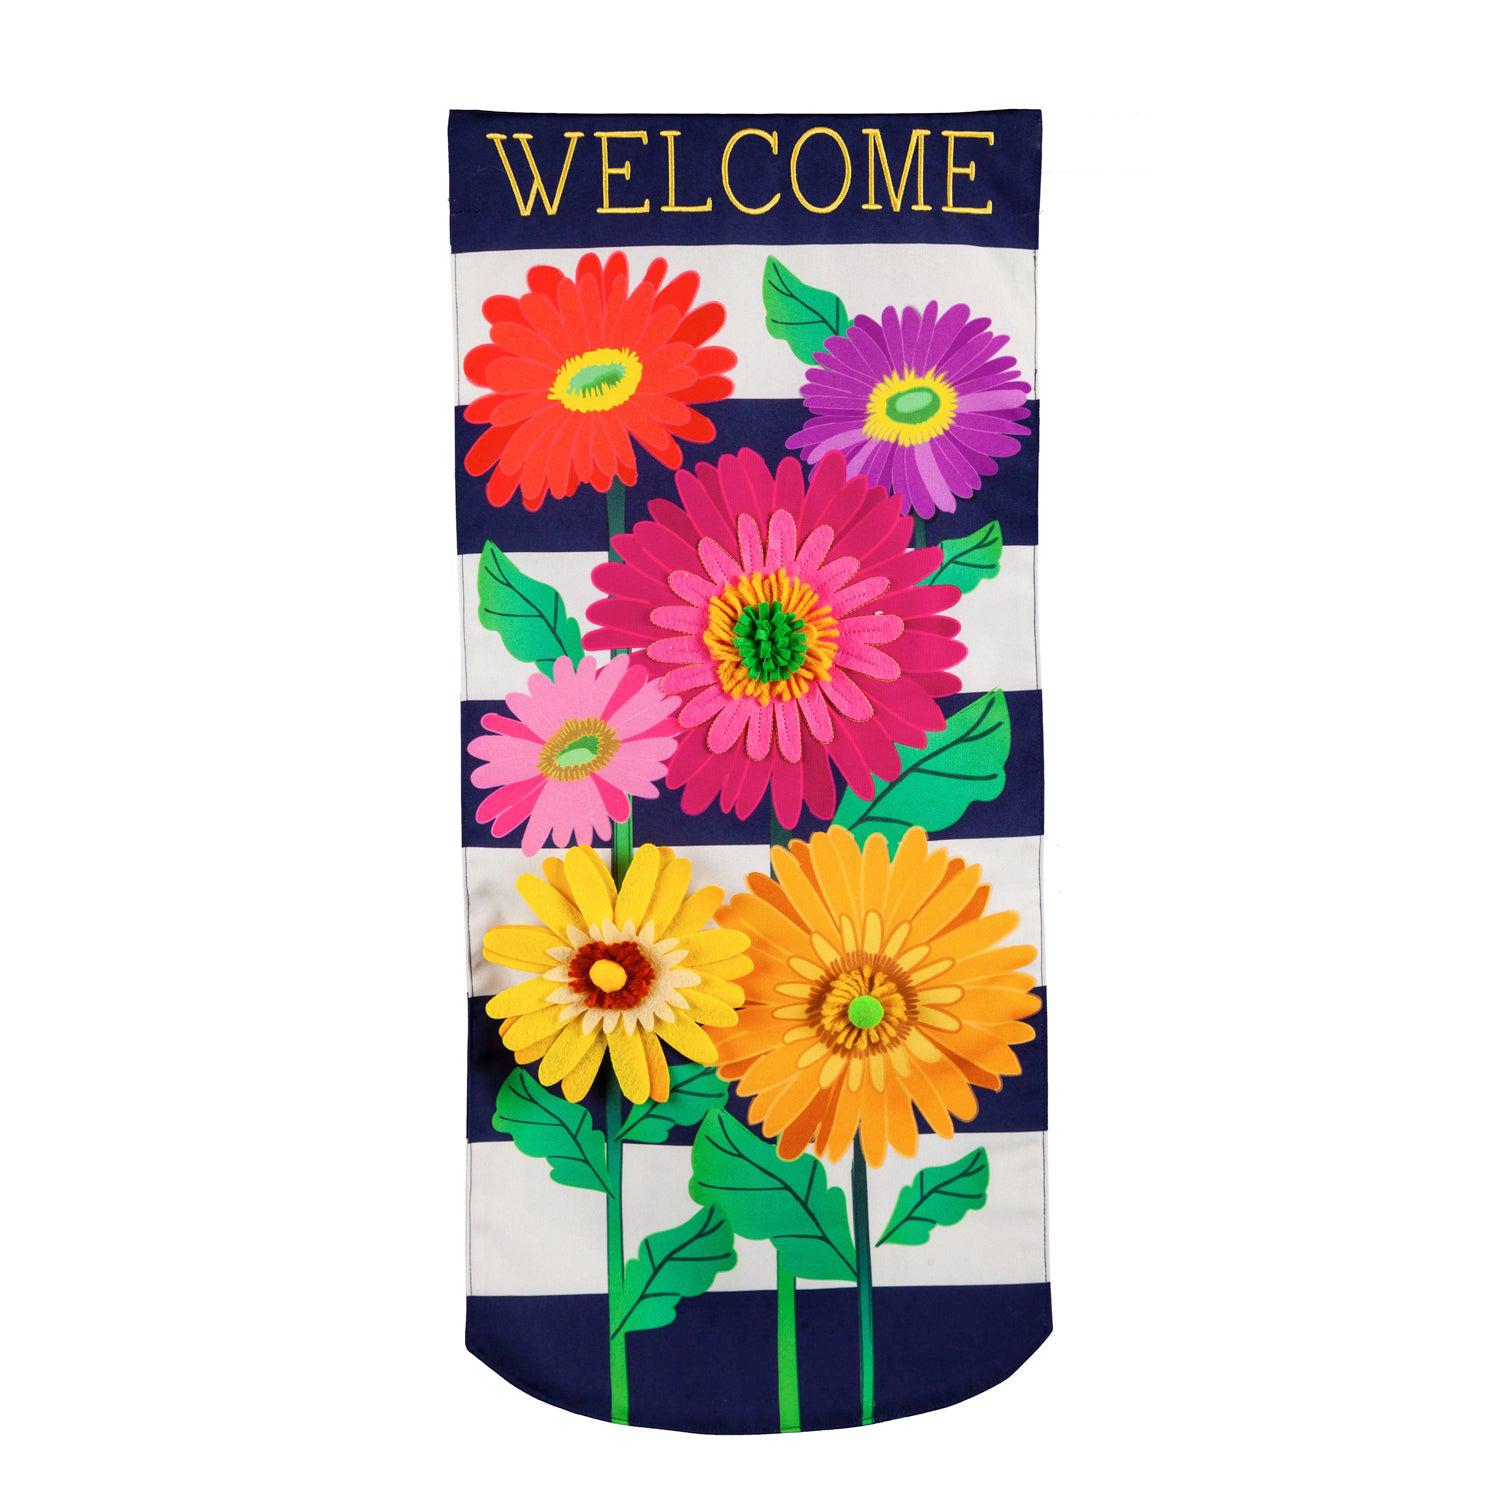 Enjoy the beauty of the Gerbera Daisy Stripe Textile Décor from the Everlasting Impressions collection. This extra-long garden flag features colorful gerbera daisies over a navy and white striped background and the word "Welcome" across the top.